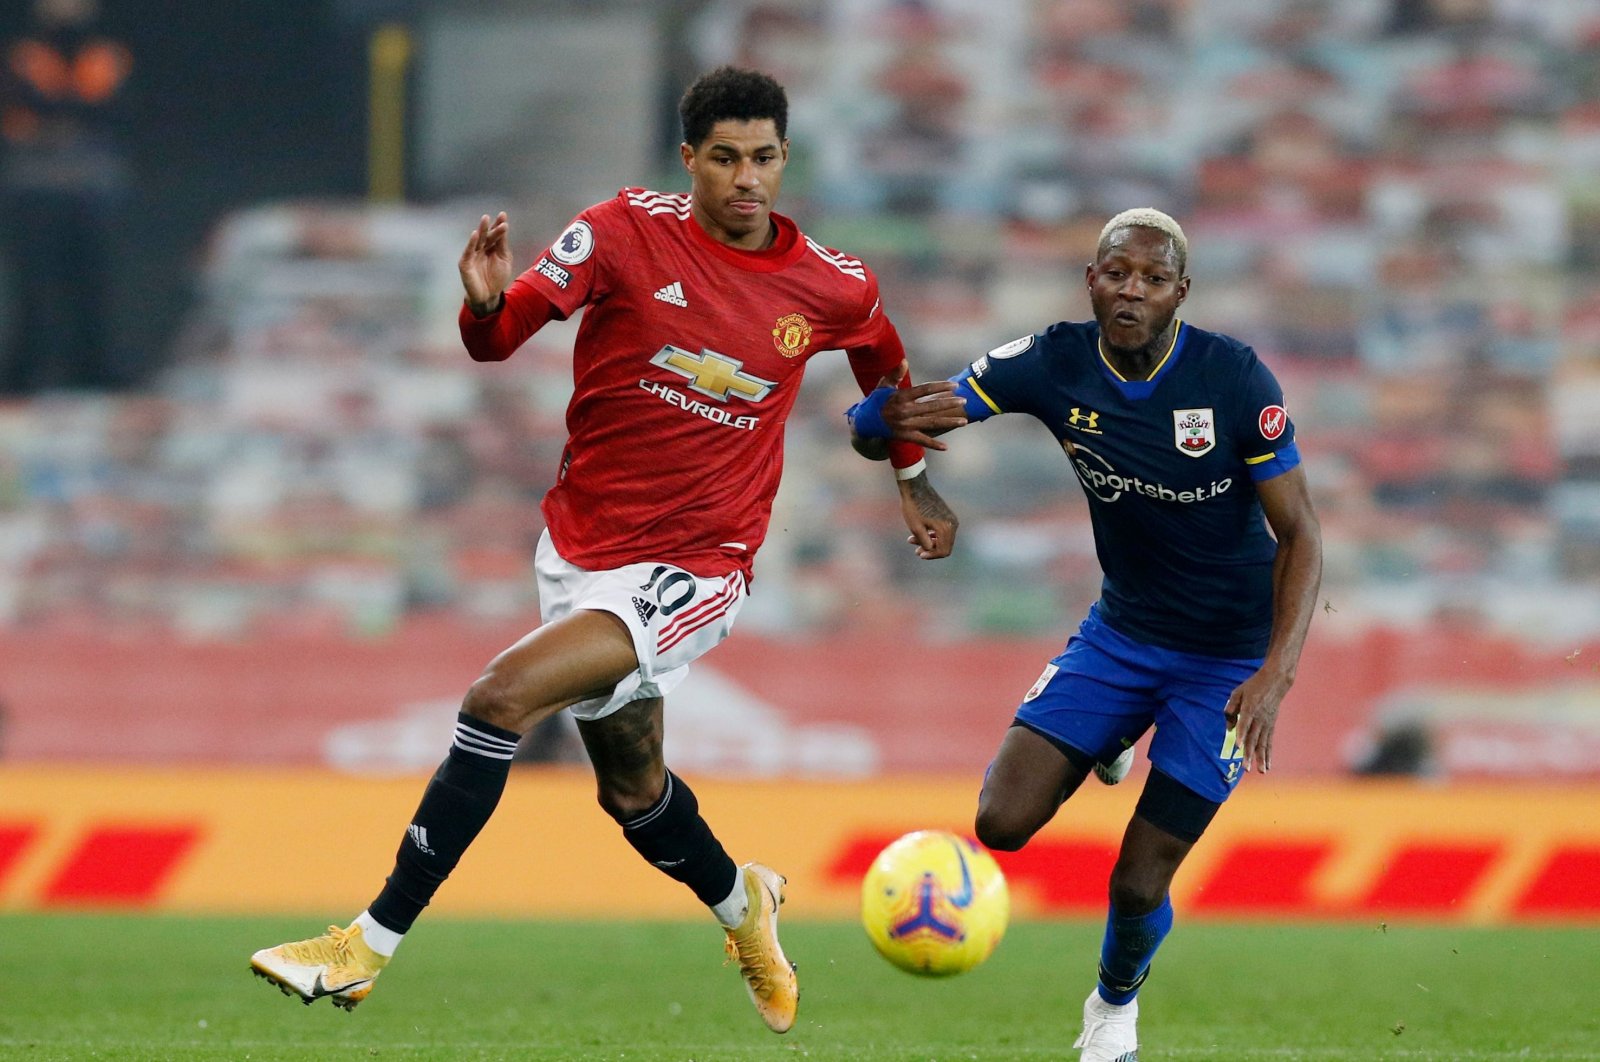 Manchester United's Marcus Rashford (L) goes past Southampton's Moussa Djenepo during their Premier League match, Old Trafford, Manchester, Feb. 2, 2021.